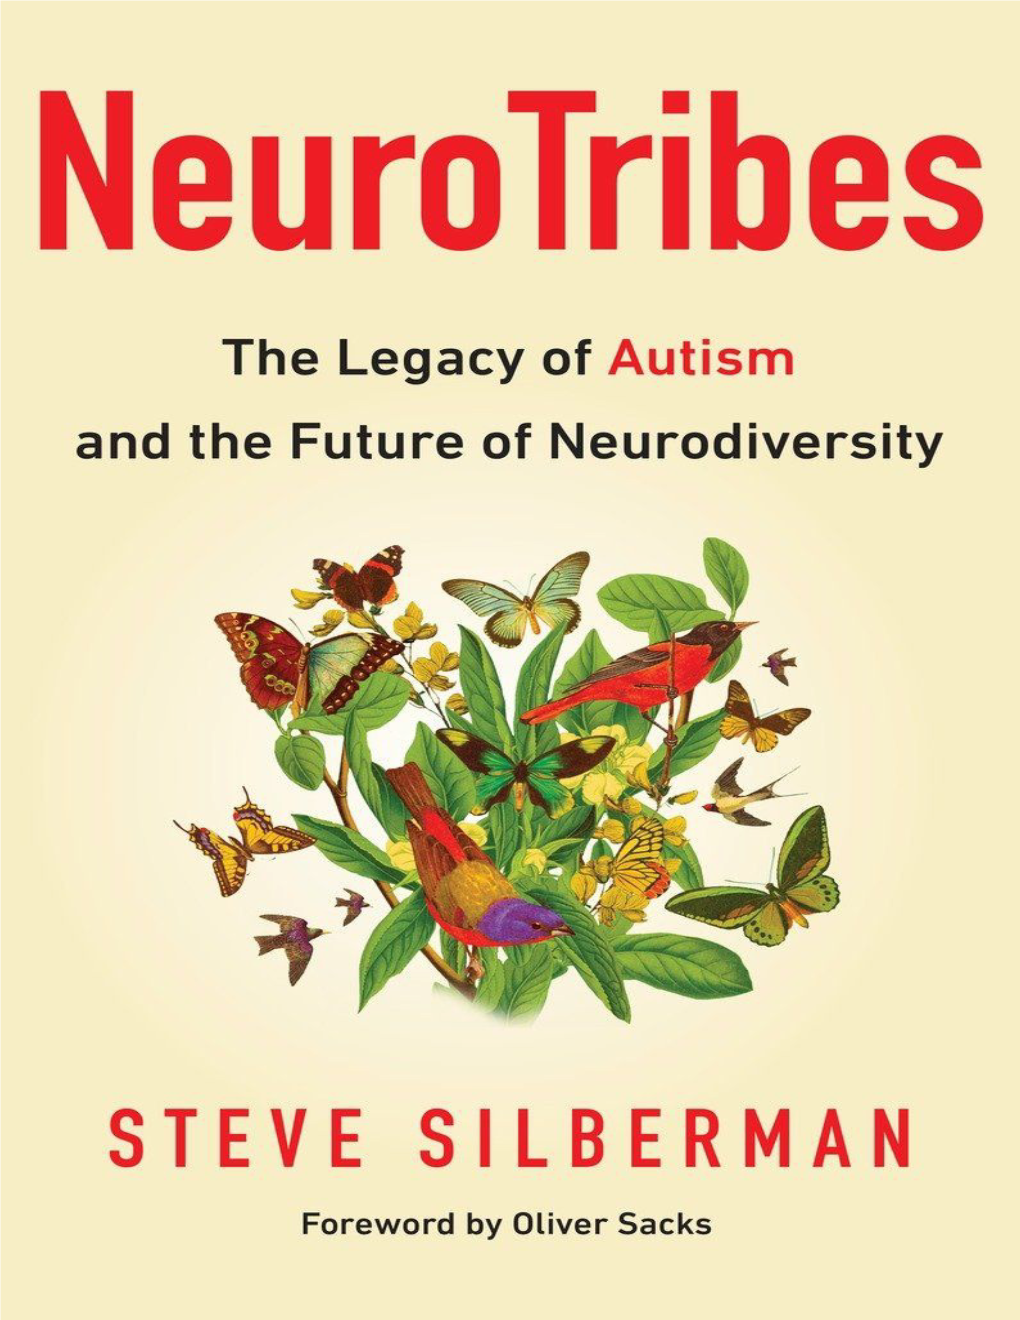 Neurotribes: the Legacy of Autism and the Future of Neurodiversity